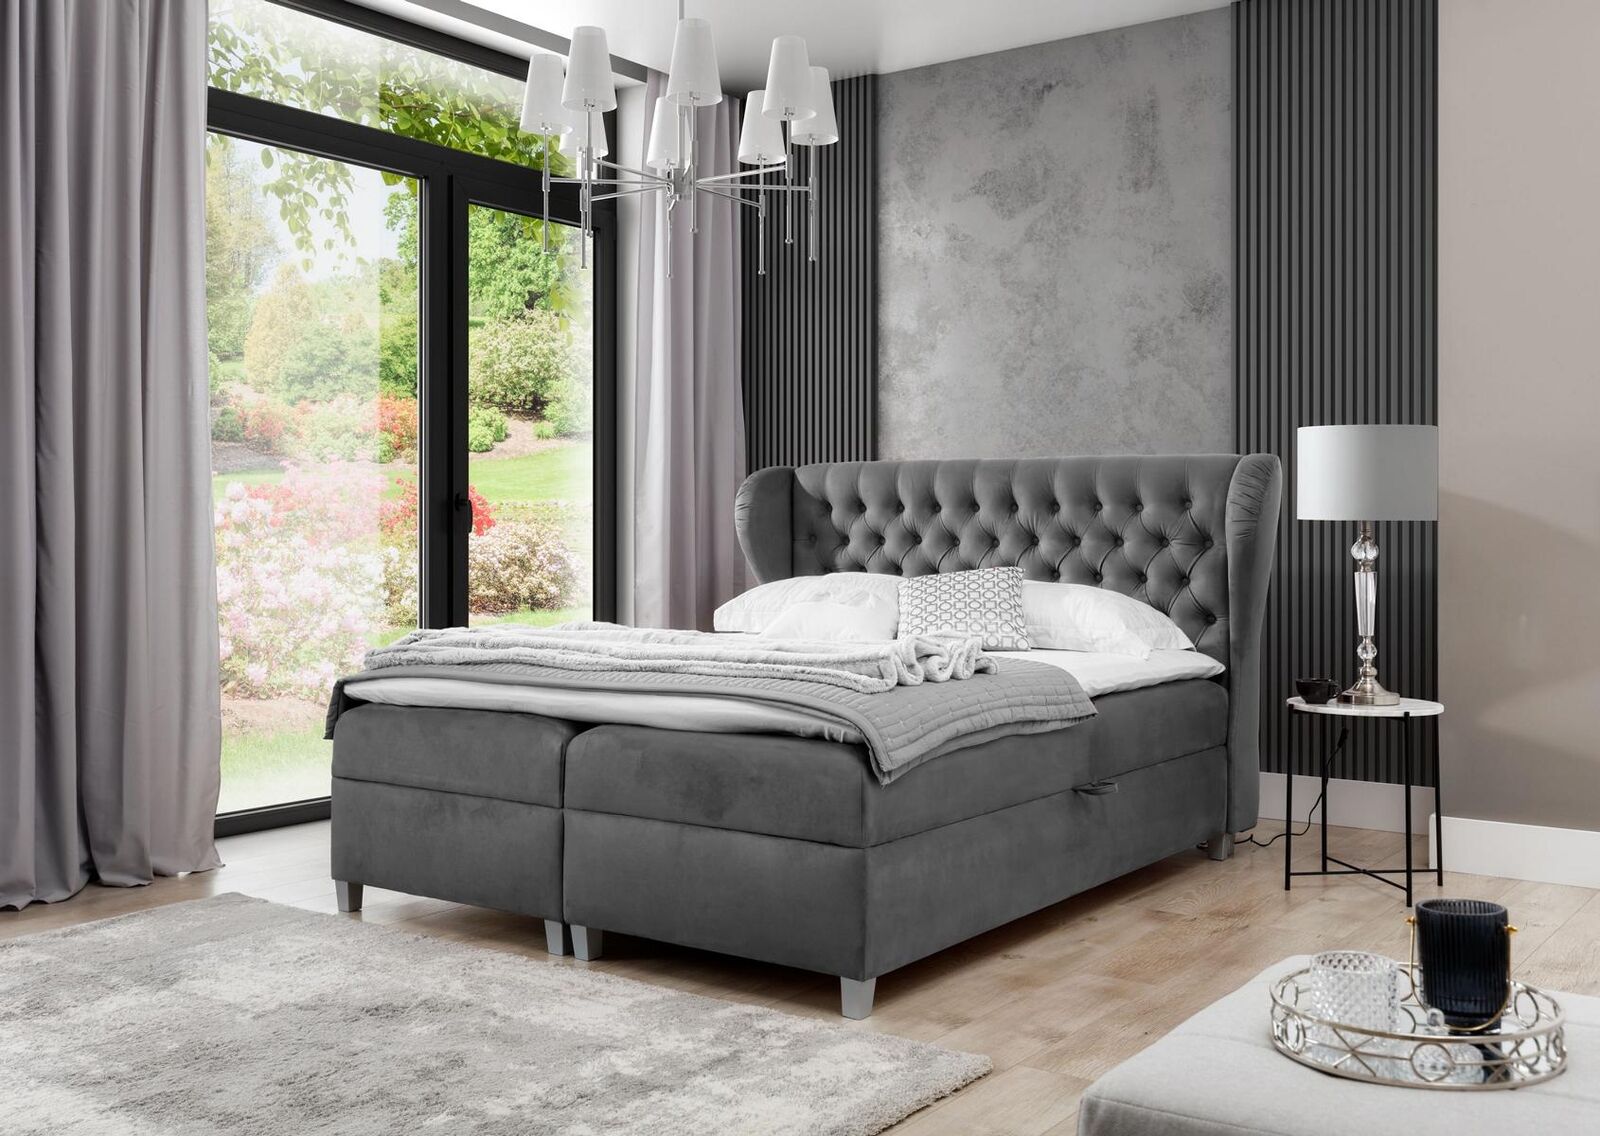 Luxury Design Boxspringbed Bedroom Upholstered Bed Modern Furniture Chesterfield